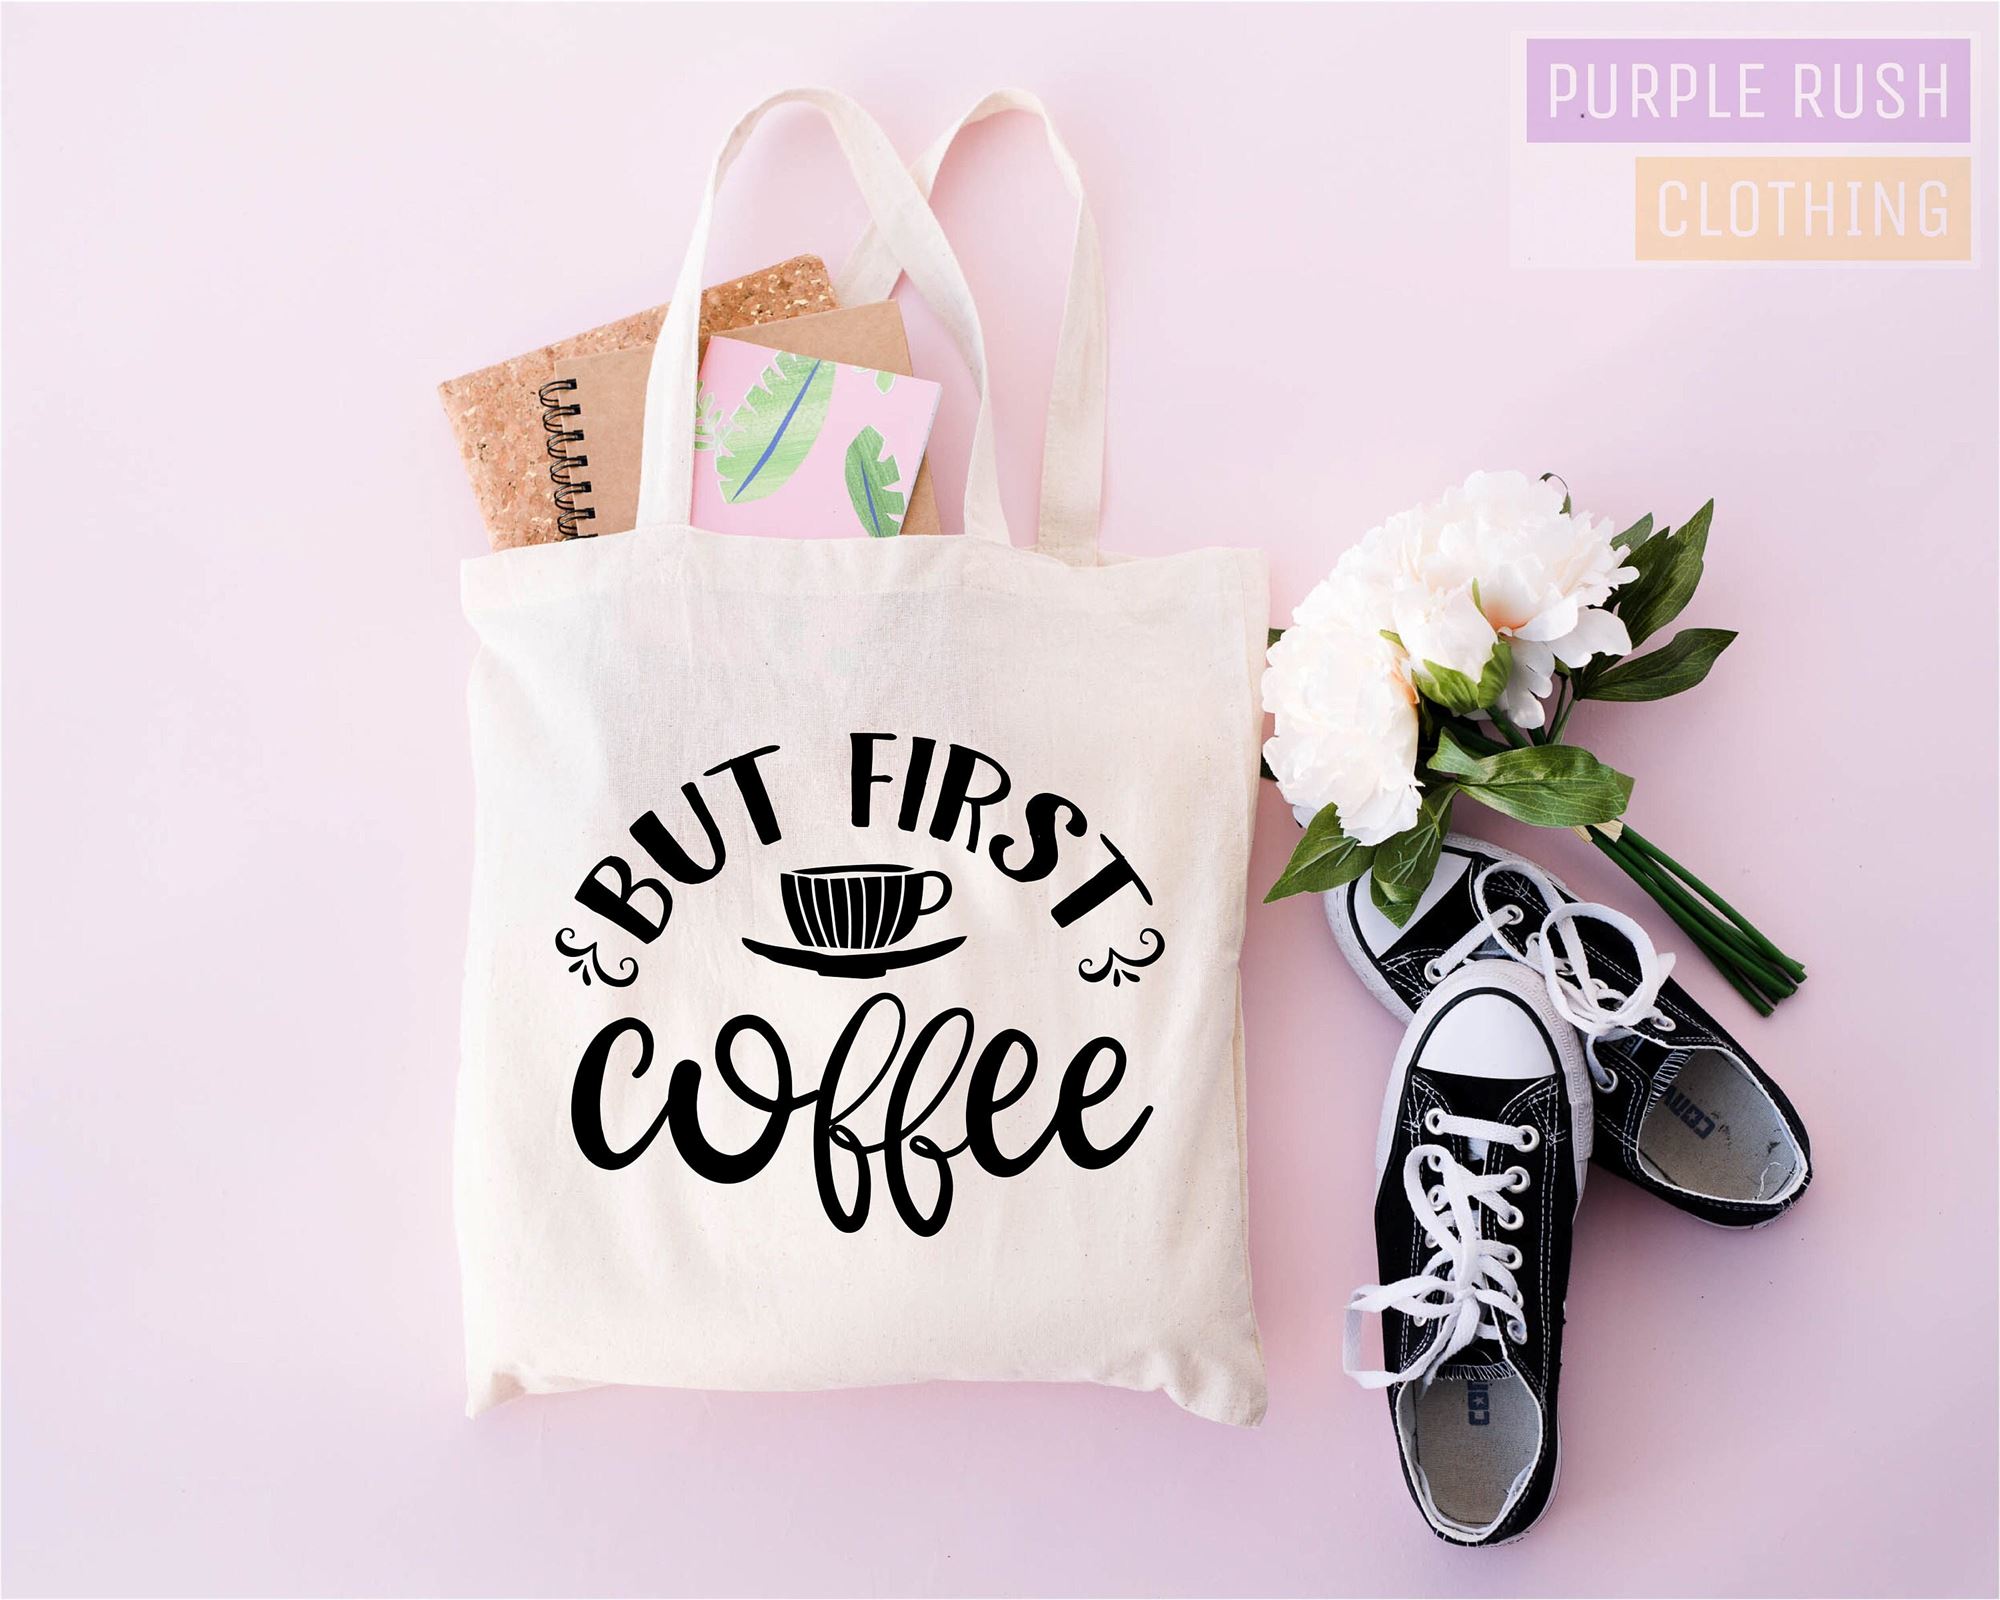 Limited Editon Coffee Lover Gift Coffee Gift Tote Bag With Zipper Canvas Tote Bag Retro Tote Bag Tote Bag Aesthetic Tote Bag Zipper Tote Bag Tote 